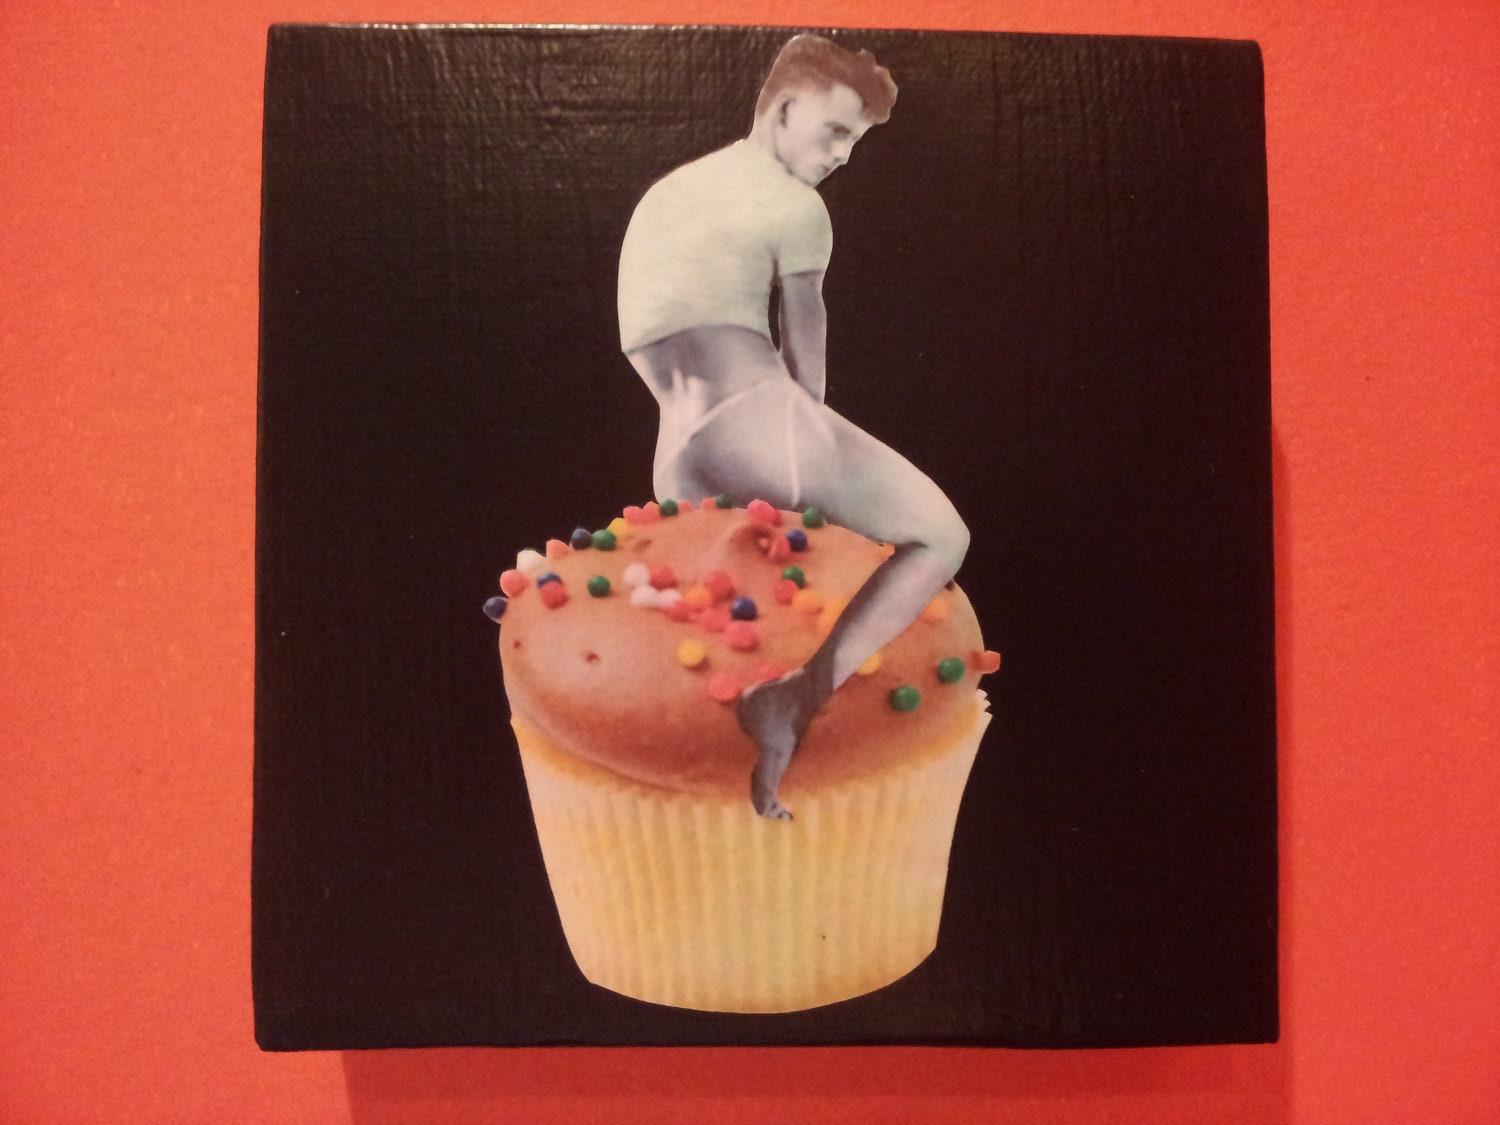 Etsy Pinup vintage Male Cupcake  by pinups Vintage gainesville Beefcake Art on sugafly cupcakes